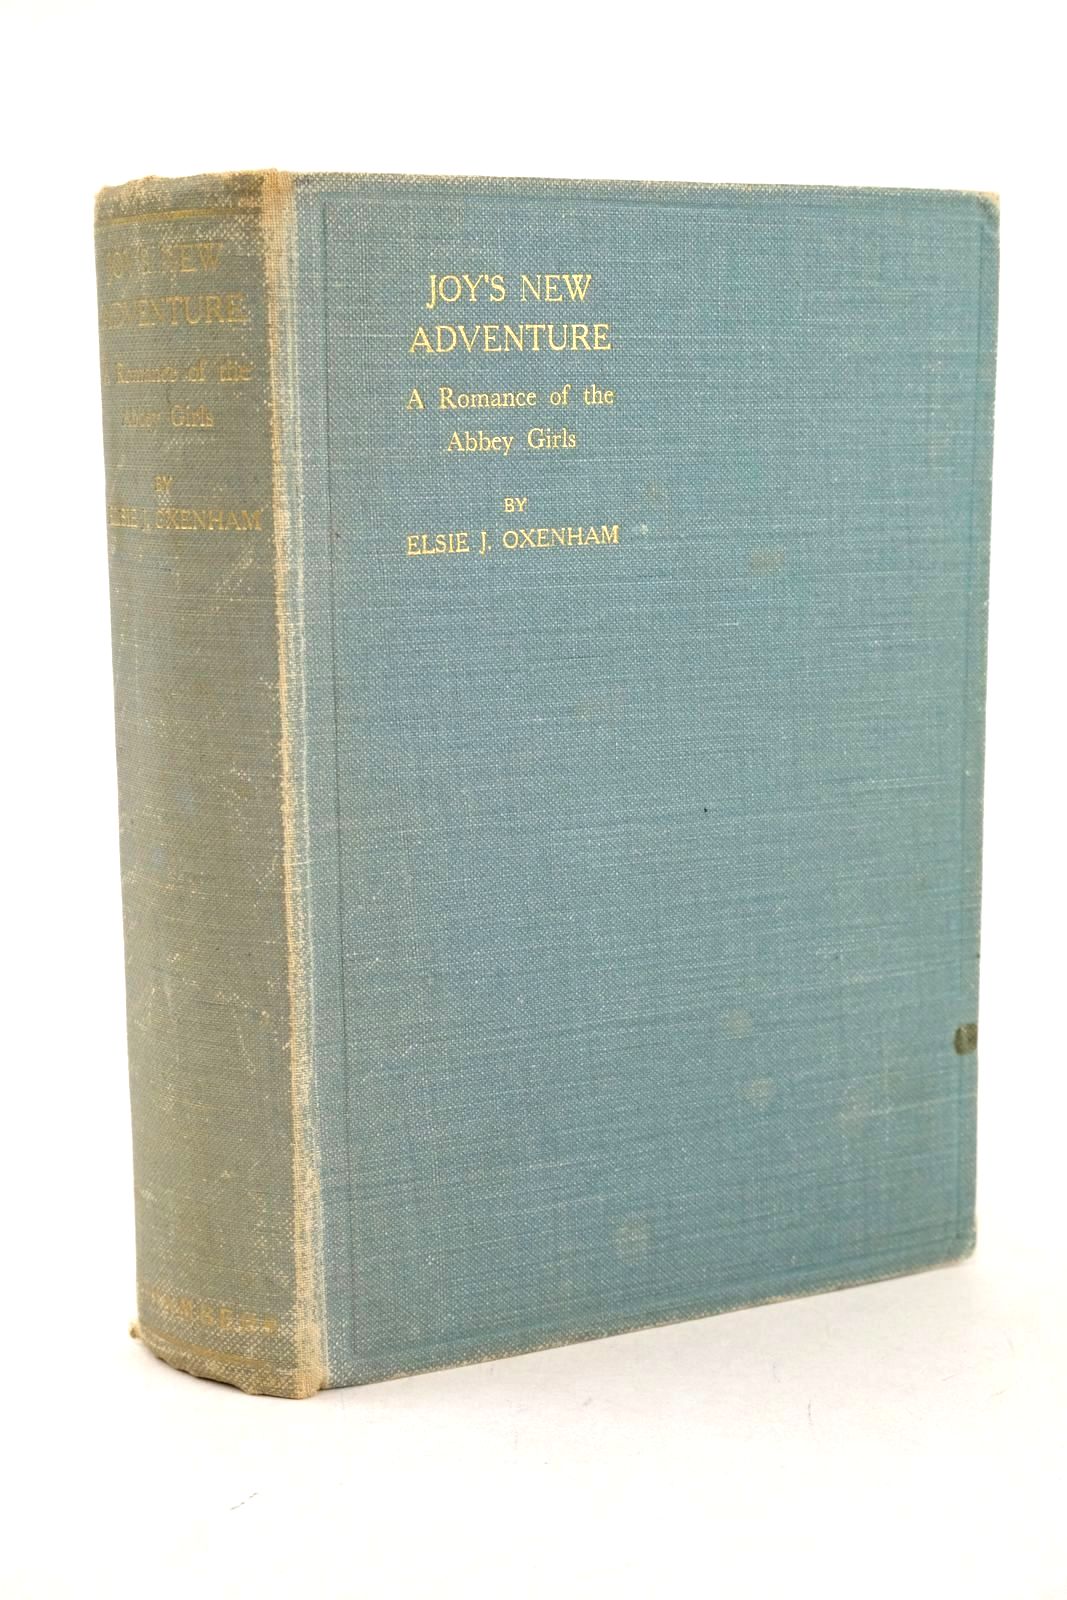 Photo of JOY'S NEW ADVENTURE written by Oxenham, Elsie J. illustrated by Cloke, Rene published by W. &amp; R. Chambers Limited (STOCK CODE: 1327051)  for sale by Stella & Rose's Books